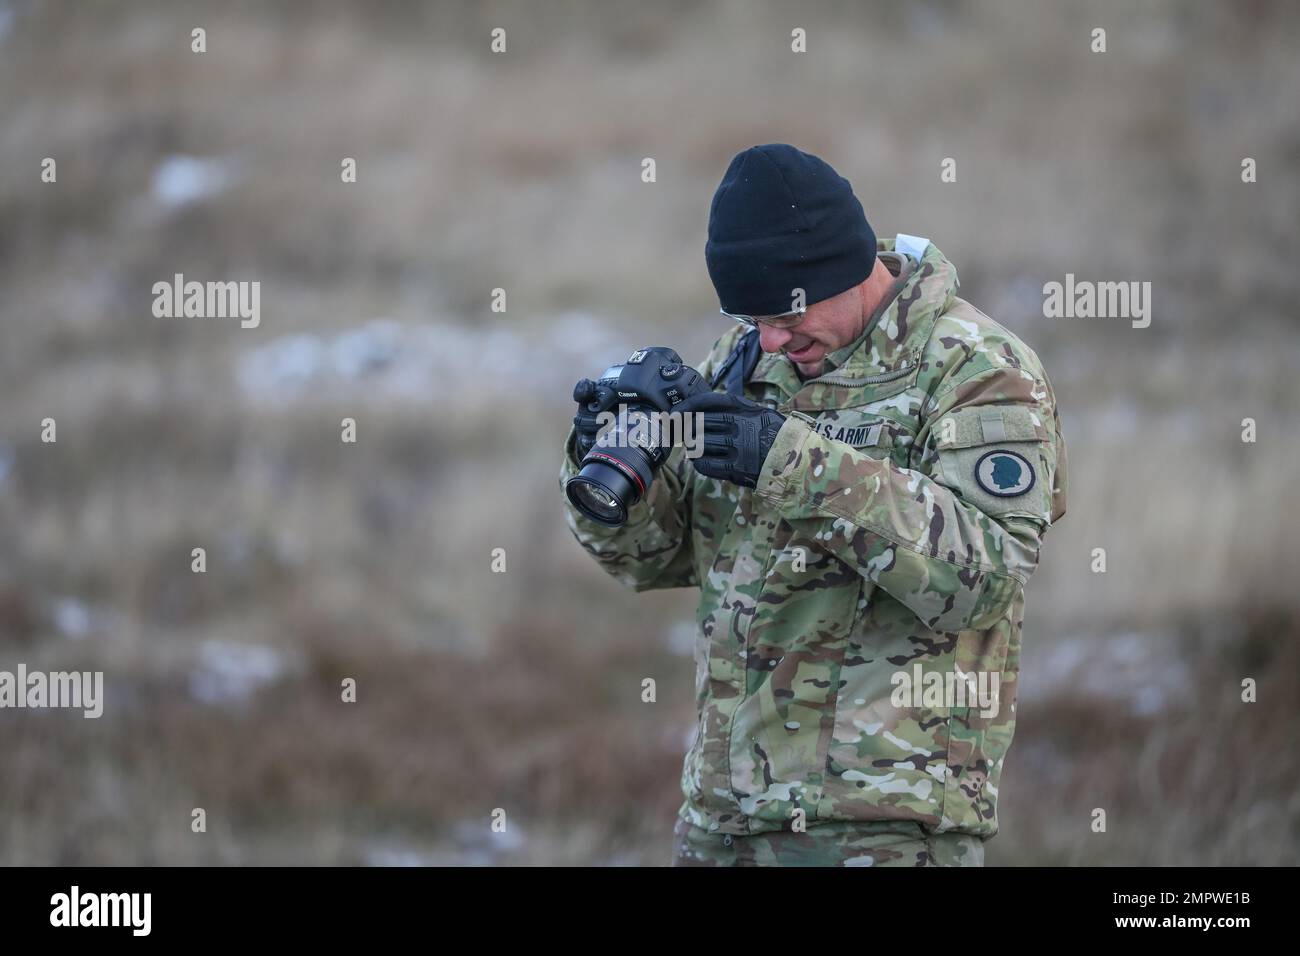 U.S. Army Staff Sgt. Matthew Foster, a mass communication specialist assigned to 117th Mobile Public Affairs Department (117th MPAD), operationally controlled by the 1st Infantry Division (1 ID), reviews photos taken during a live fire exercise rehearsal at Bemowo Piskie Training Area, Poland, Nov. 18, 2022. The 117th MPAD is among other units assigned to the 1 ID, proudly working alongside NATO allies and regional security partners to provide combat-credible forces to V Corps, America's forward deployed corps in Europe. Stock Photo